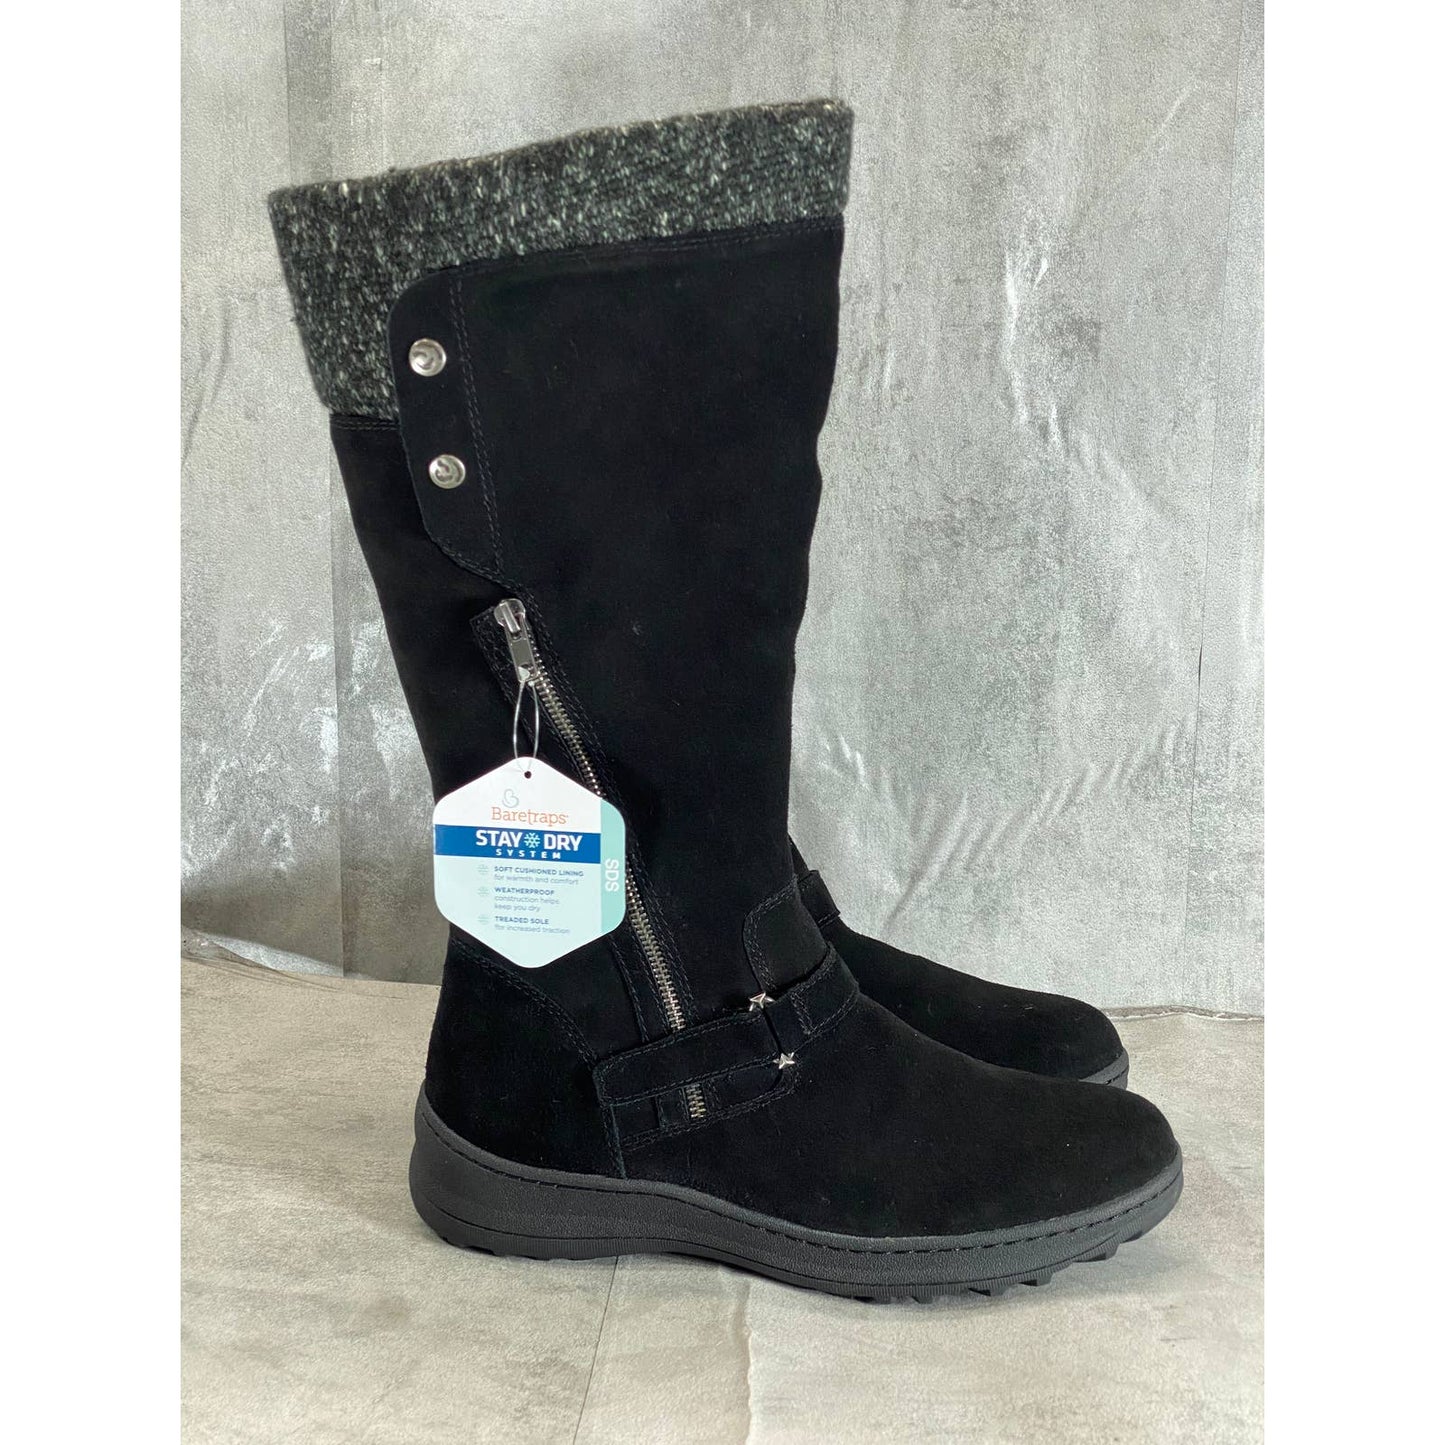 BARETRAPS Women's Black Adele Water Resistant Tall Pull-On Boots SZ 11